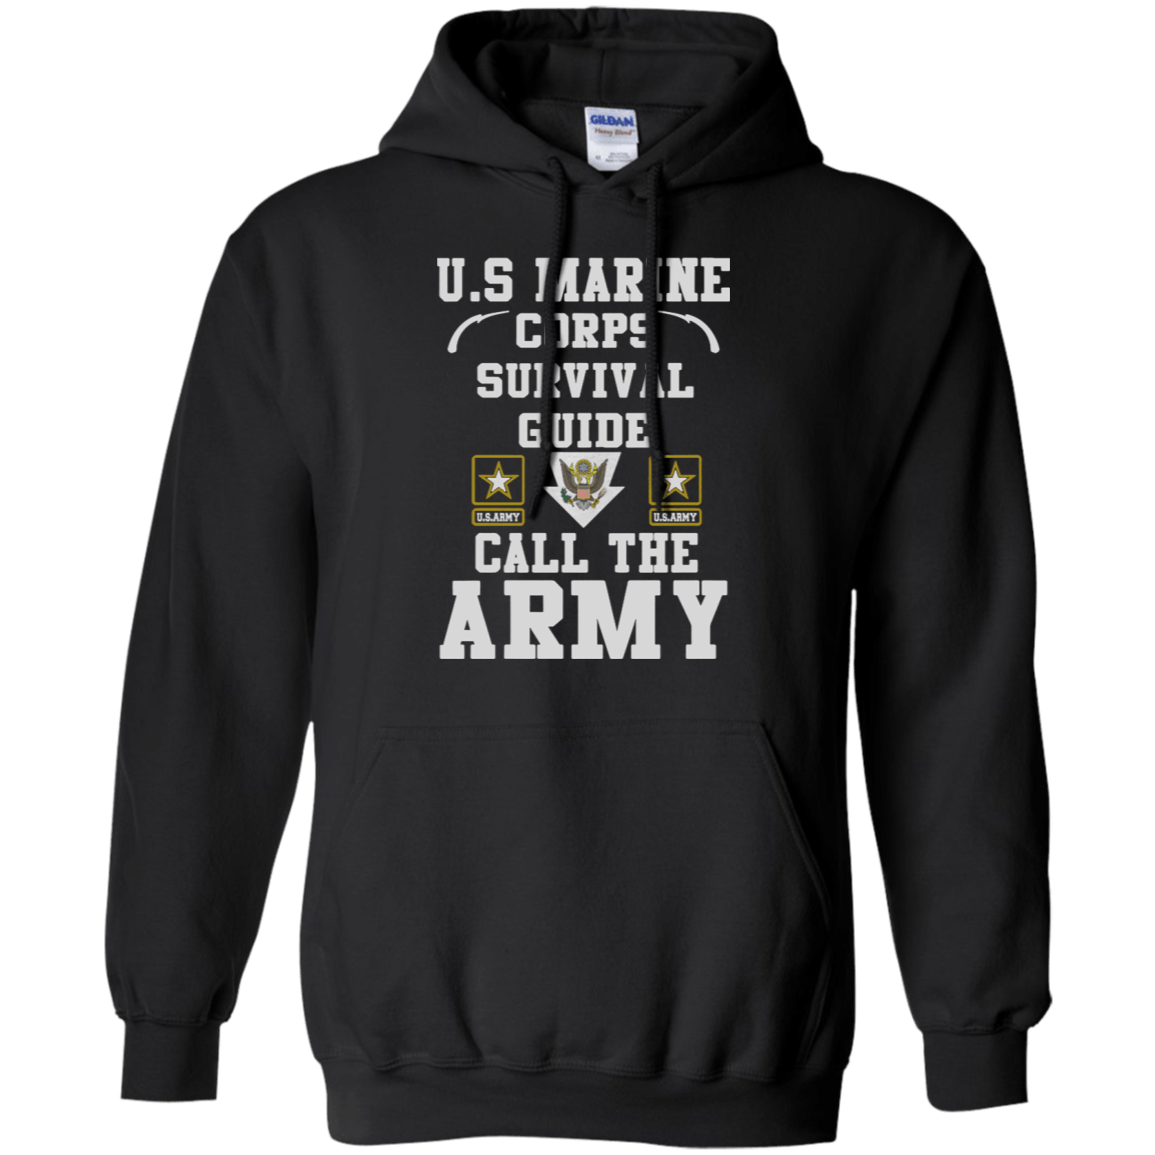 US Marine corps survival guide US Army call the Army shirt Hoodie